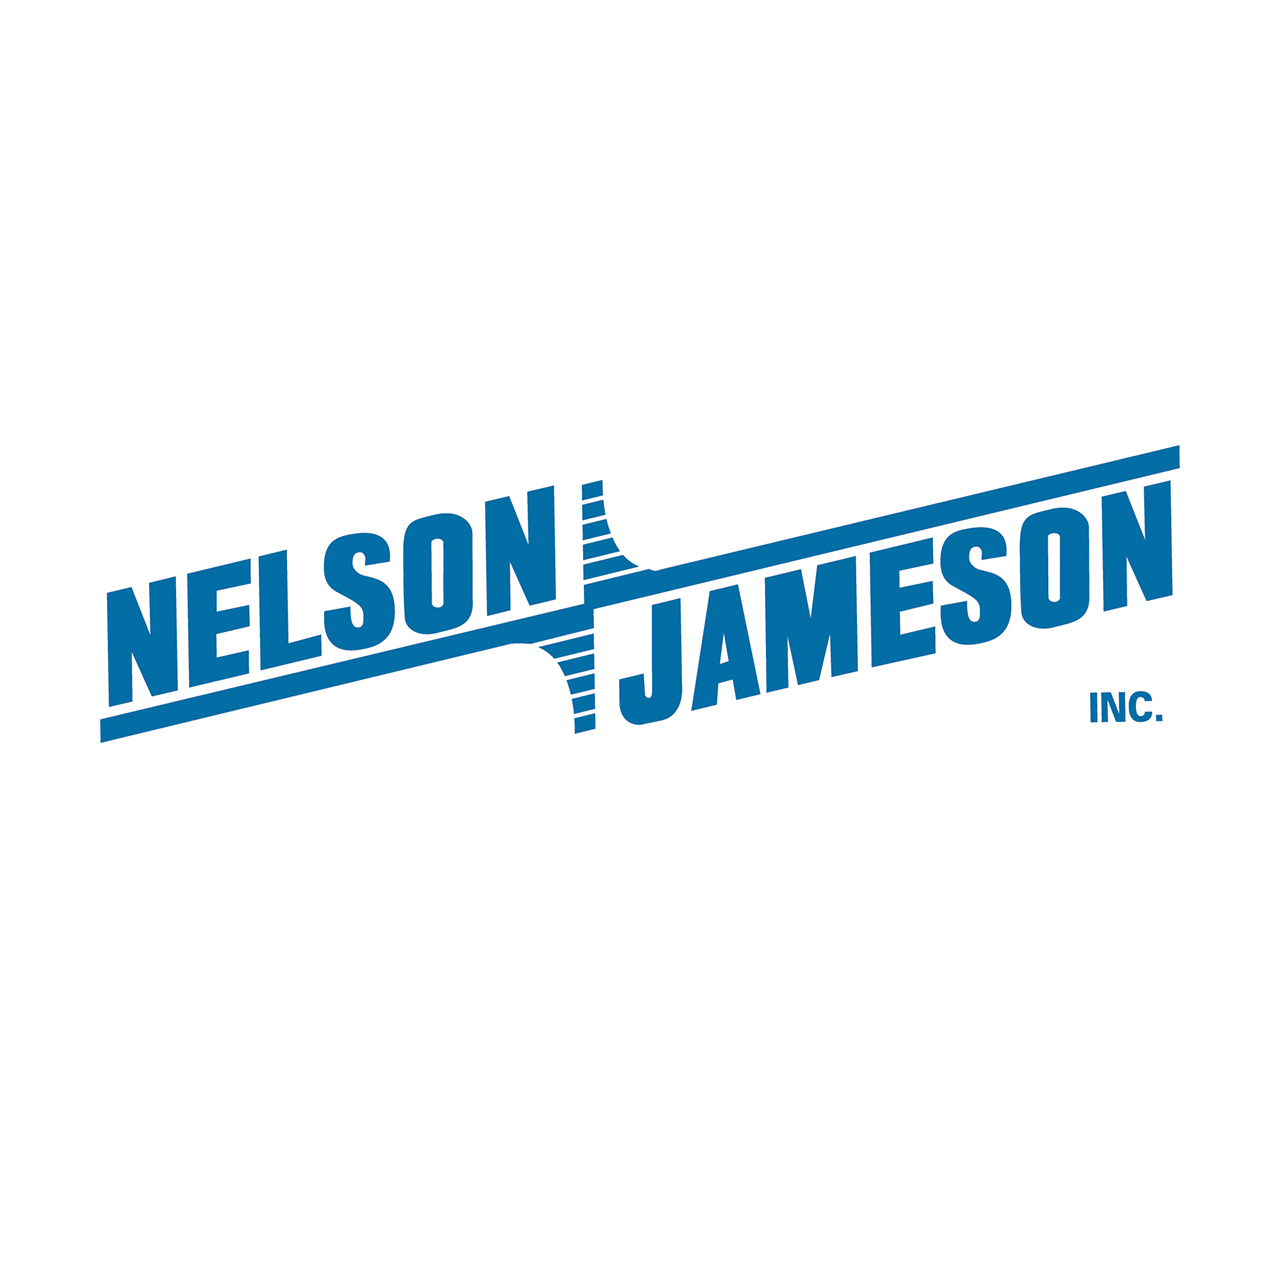 Nelson-Jameson Spirit-Filled Accu-Safe Thermometers